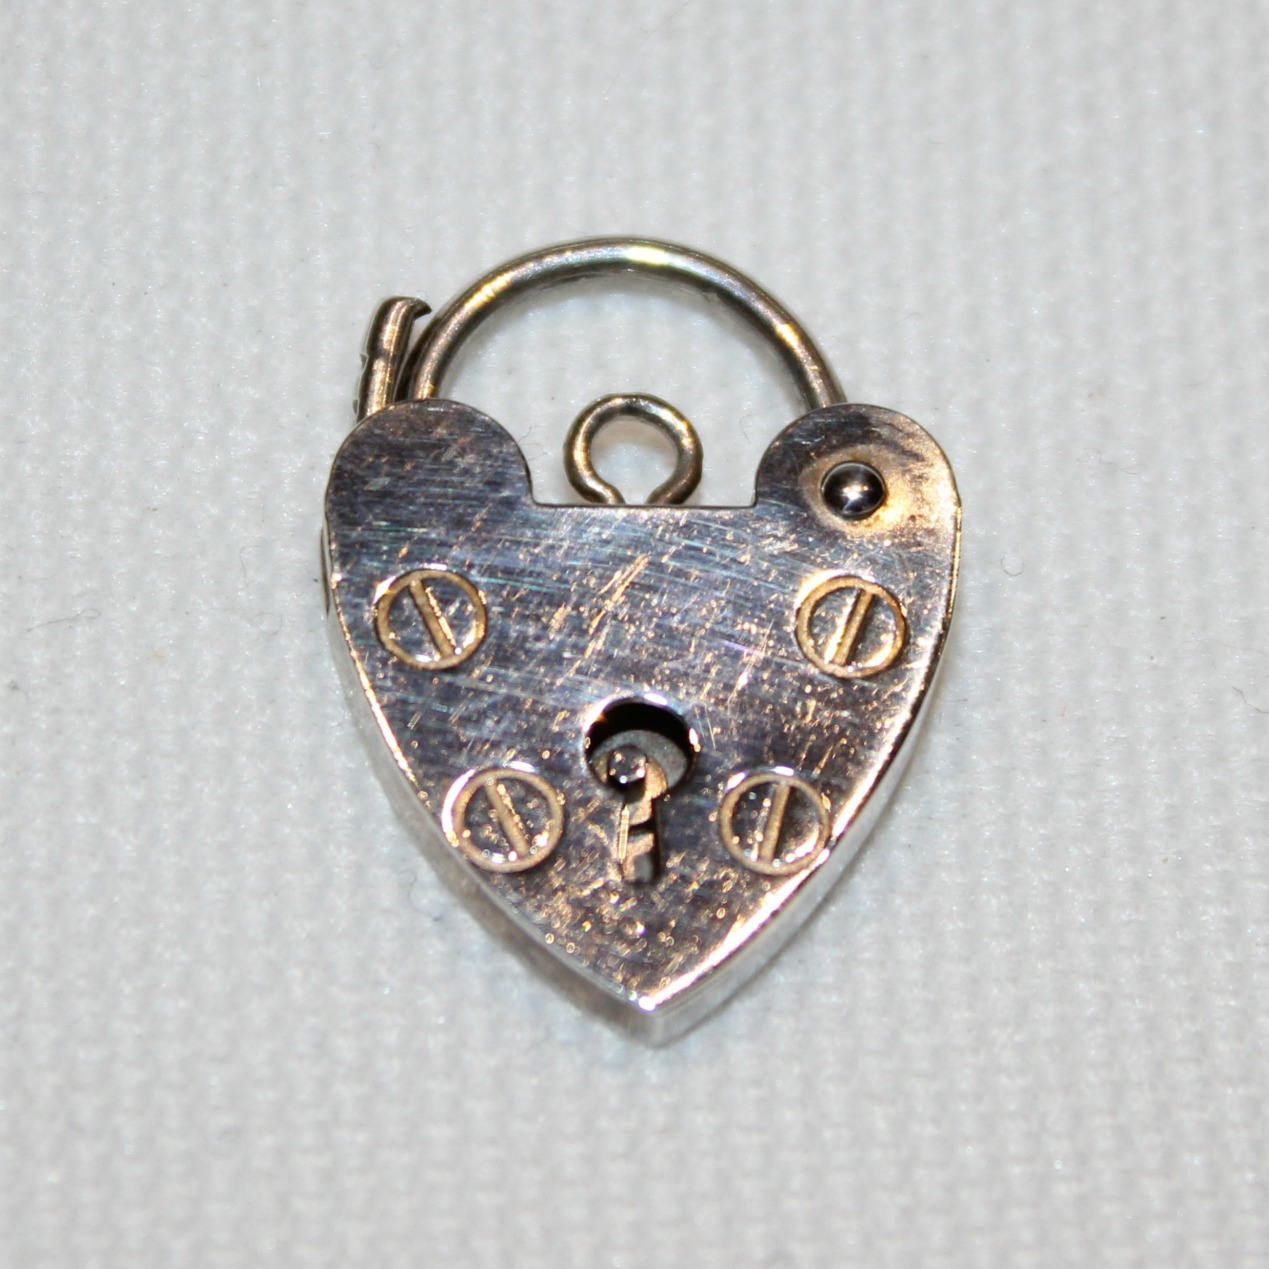 Sterling Silver Heart Padlock (suitable For A Bracelet) London 1990 Pertaining To Most Recent Heart Shaped Padlock Rings (Gallery 11 of 25)